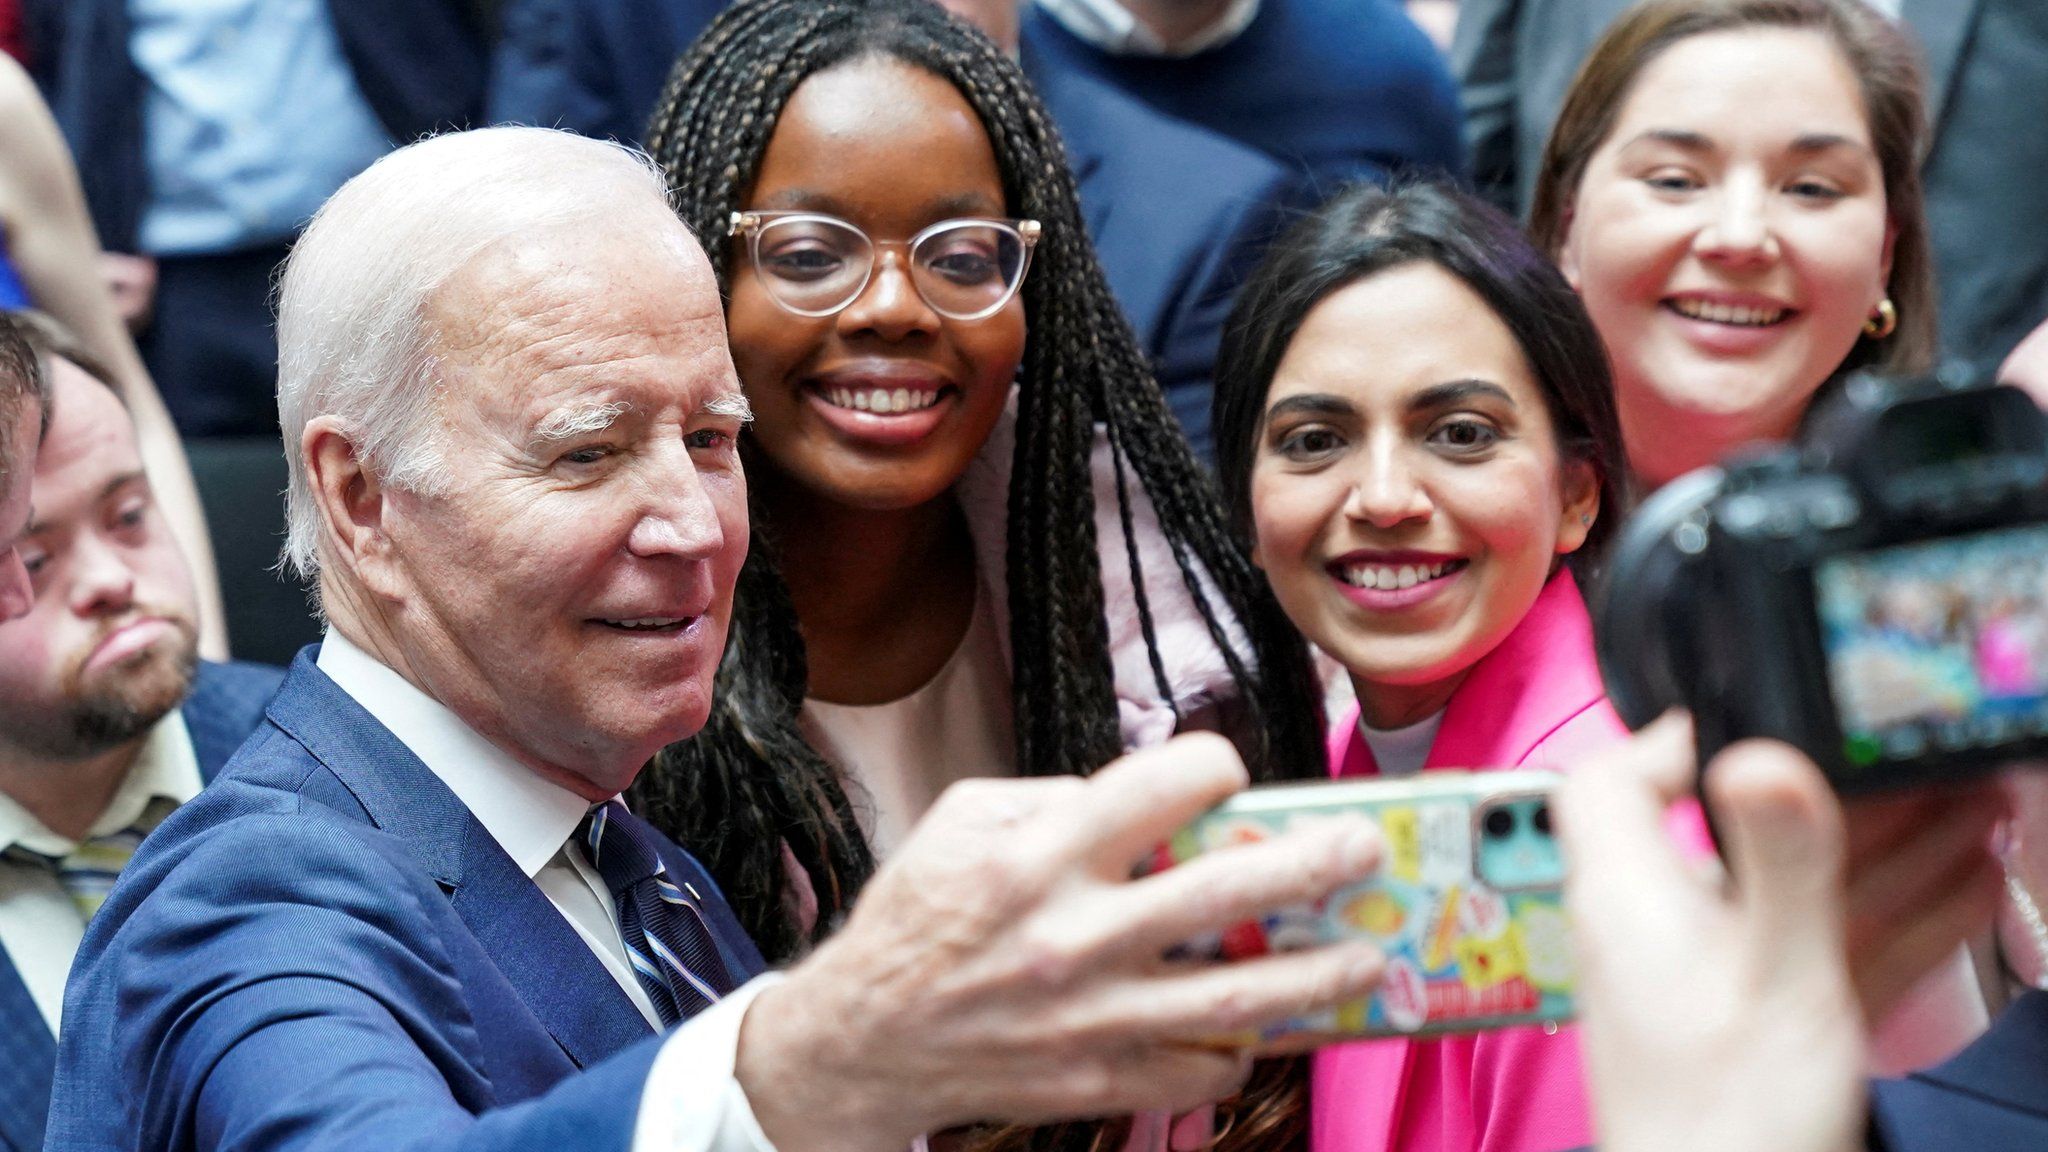 Joe Biden takes a selfie with young people at Ulster University